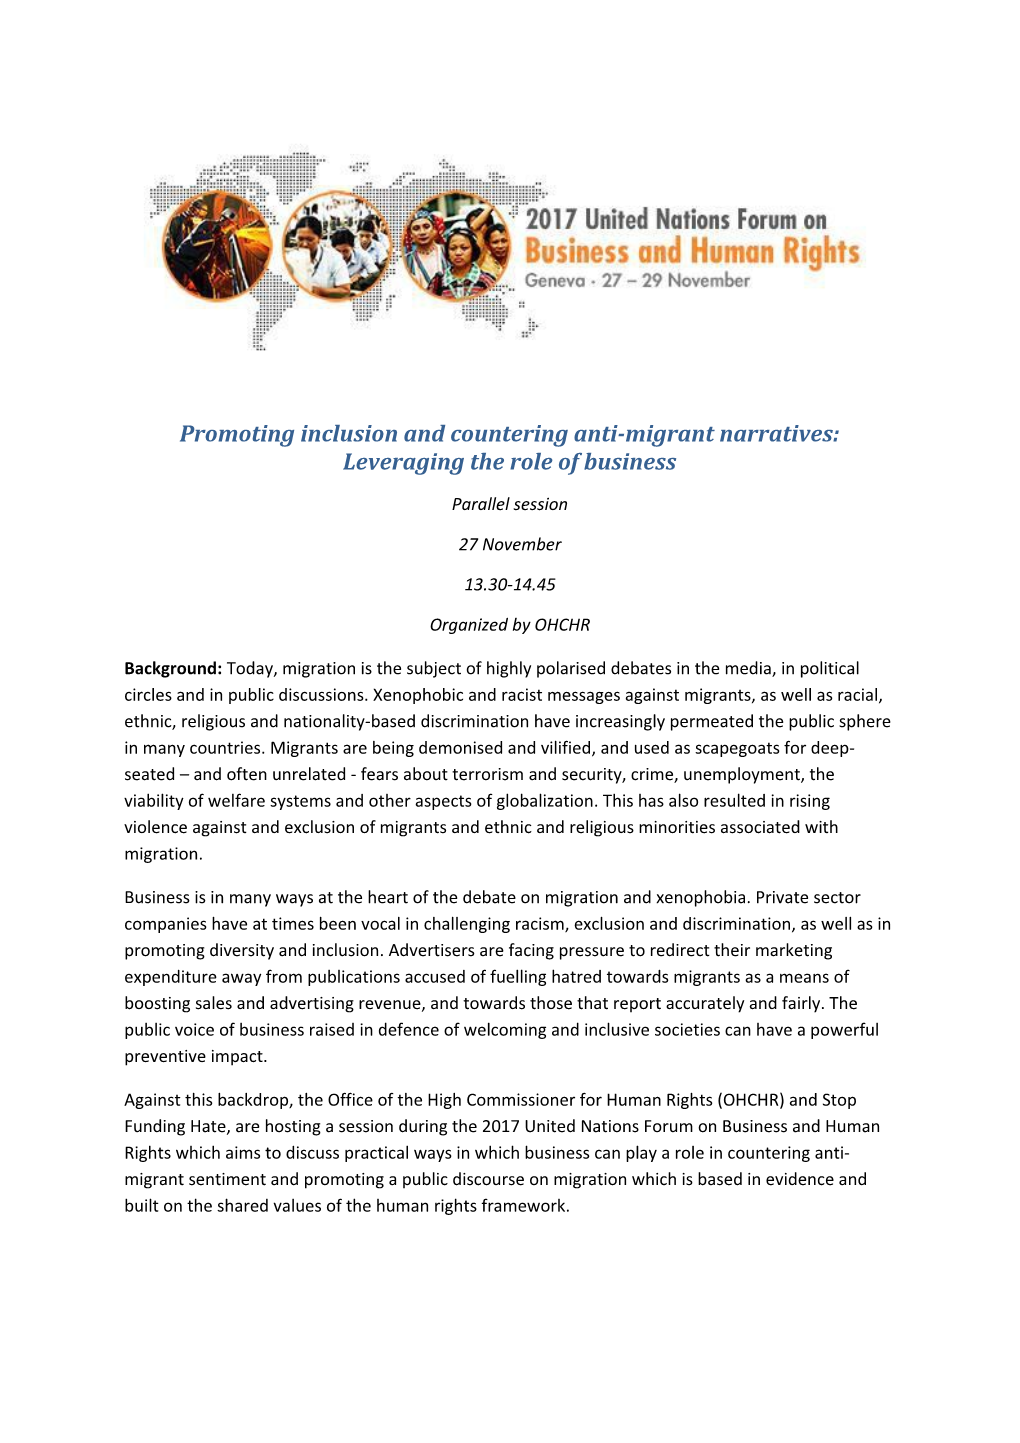 Promoting Inclusion and Countering Anti-Migrant Narratives: Leveraging the Role of Business